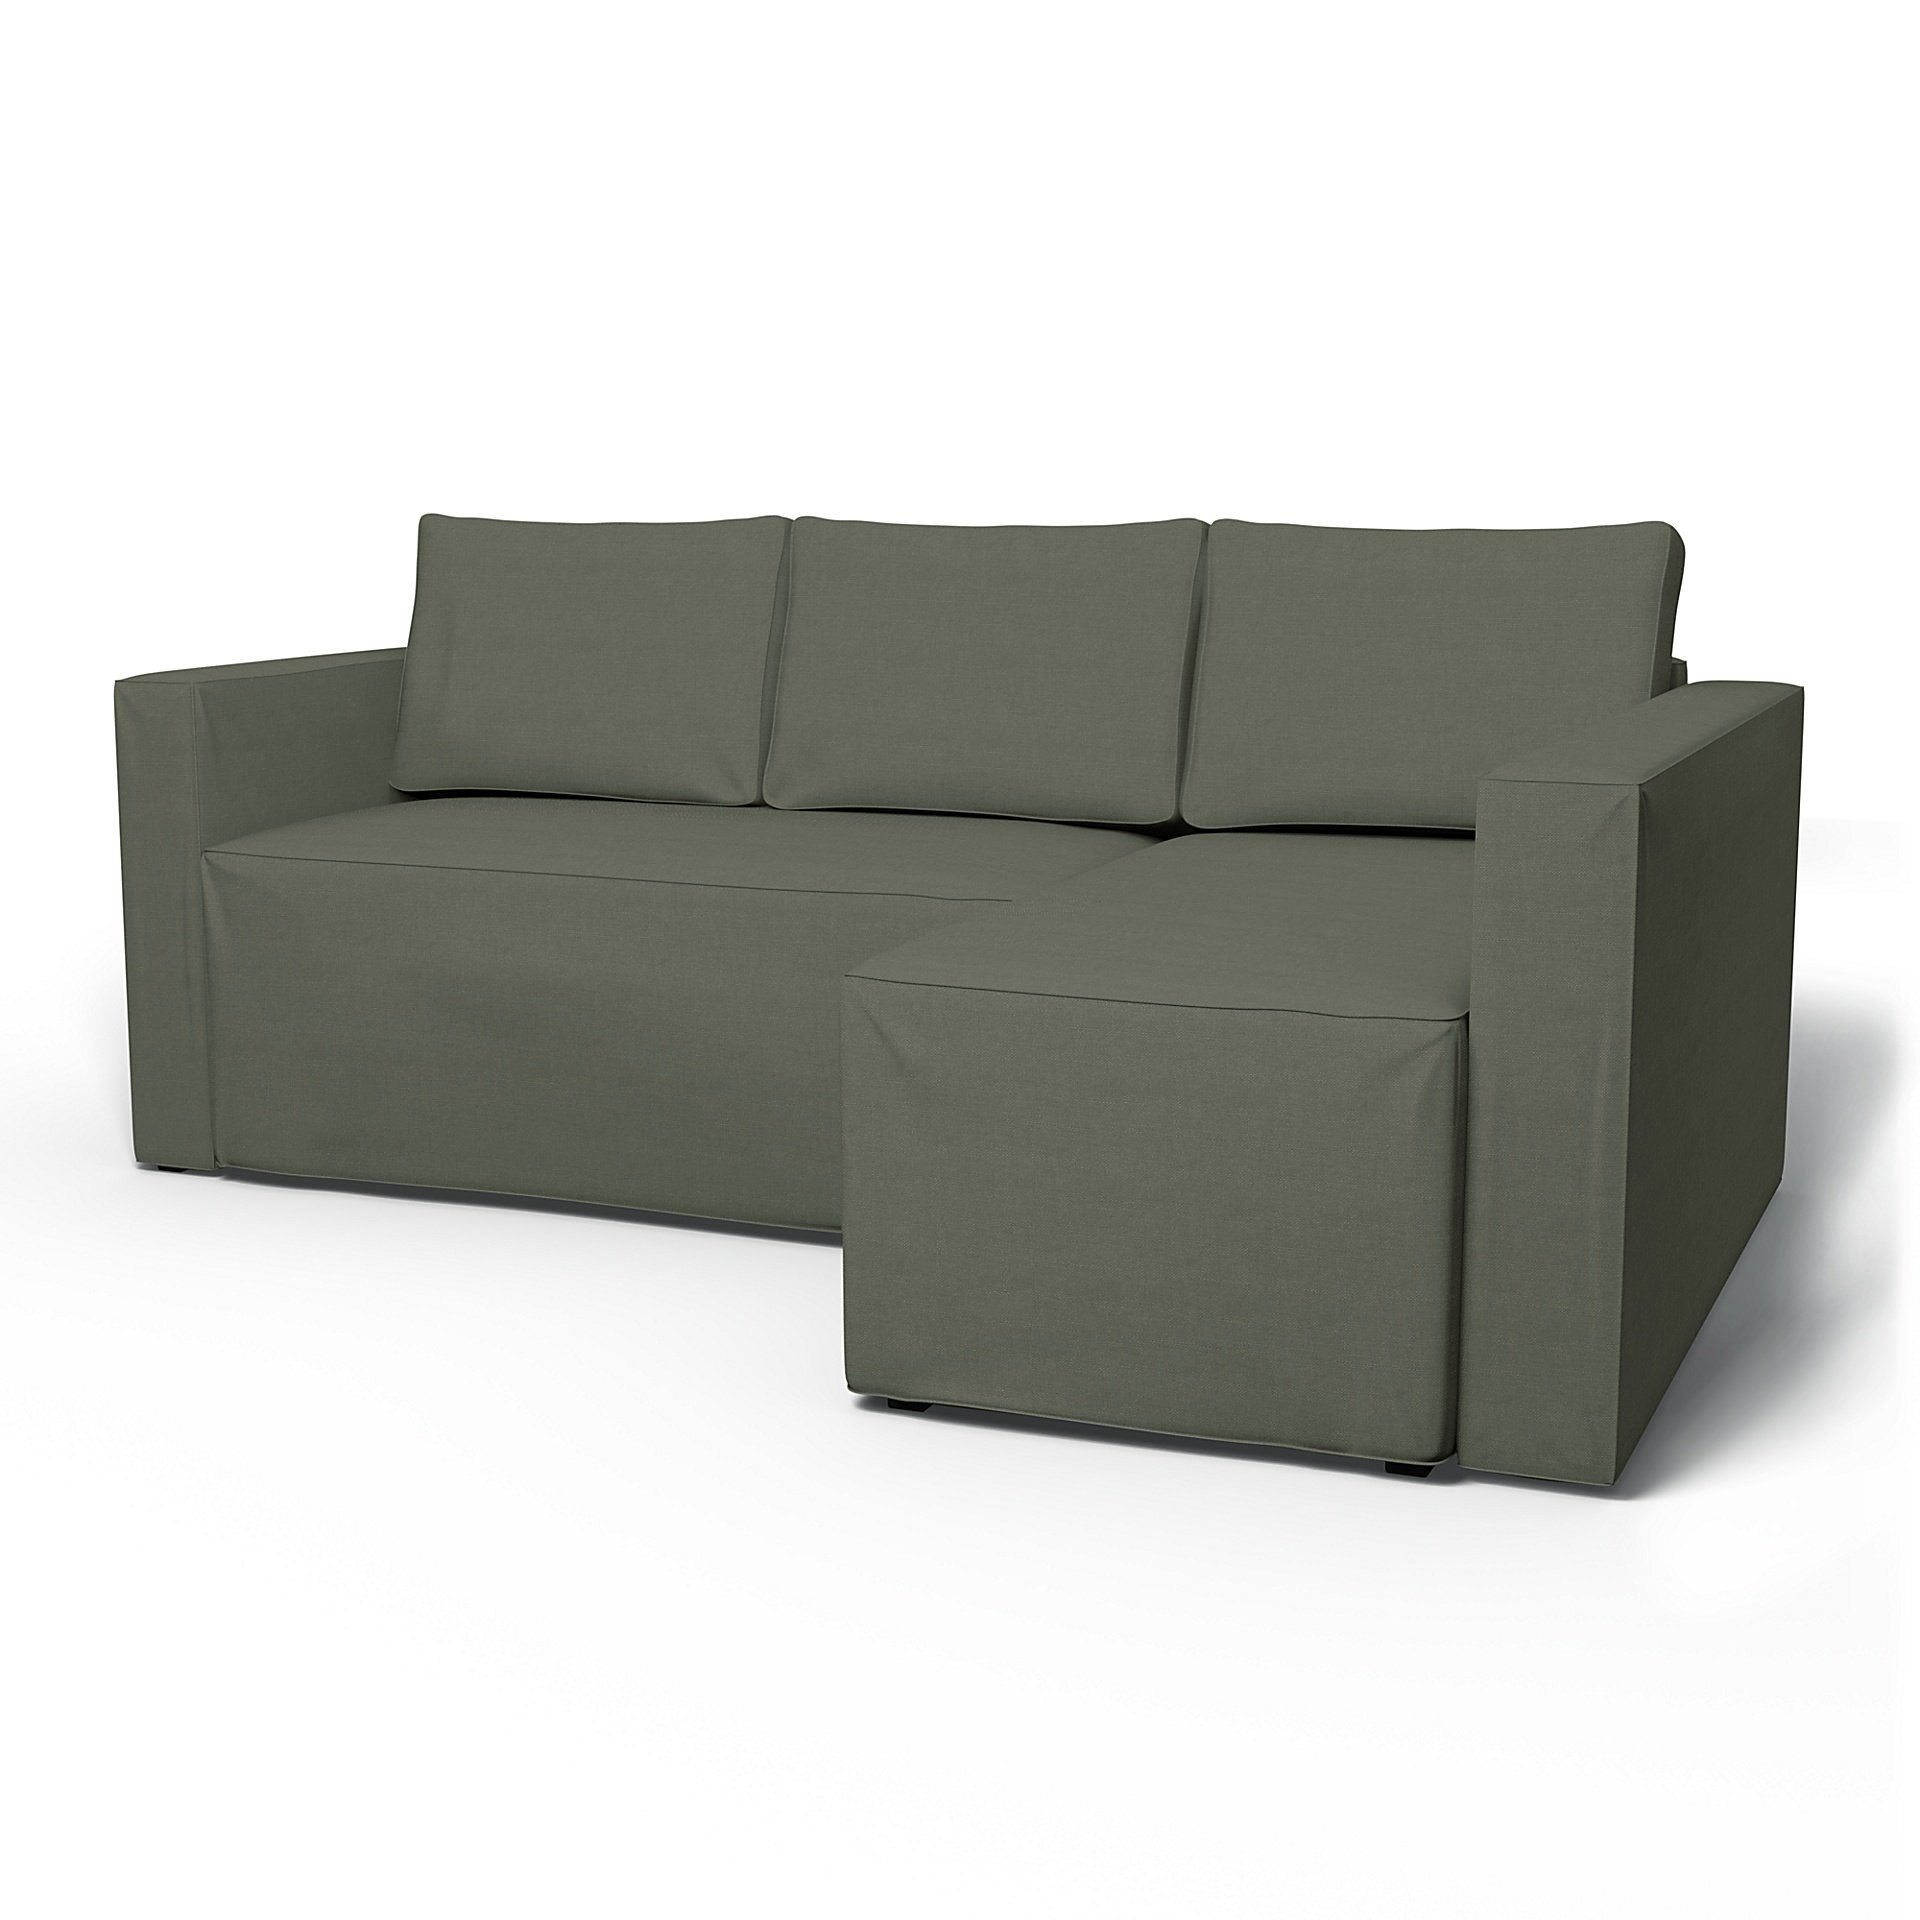 IKEA - Manstad Sofa Bed with Right Chaise Cover, Rosemary, Linen - Bemz